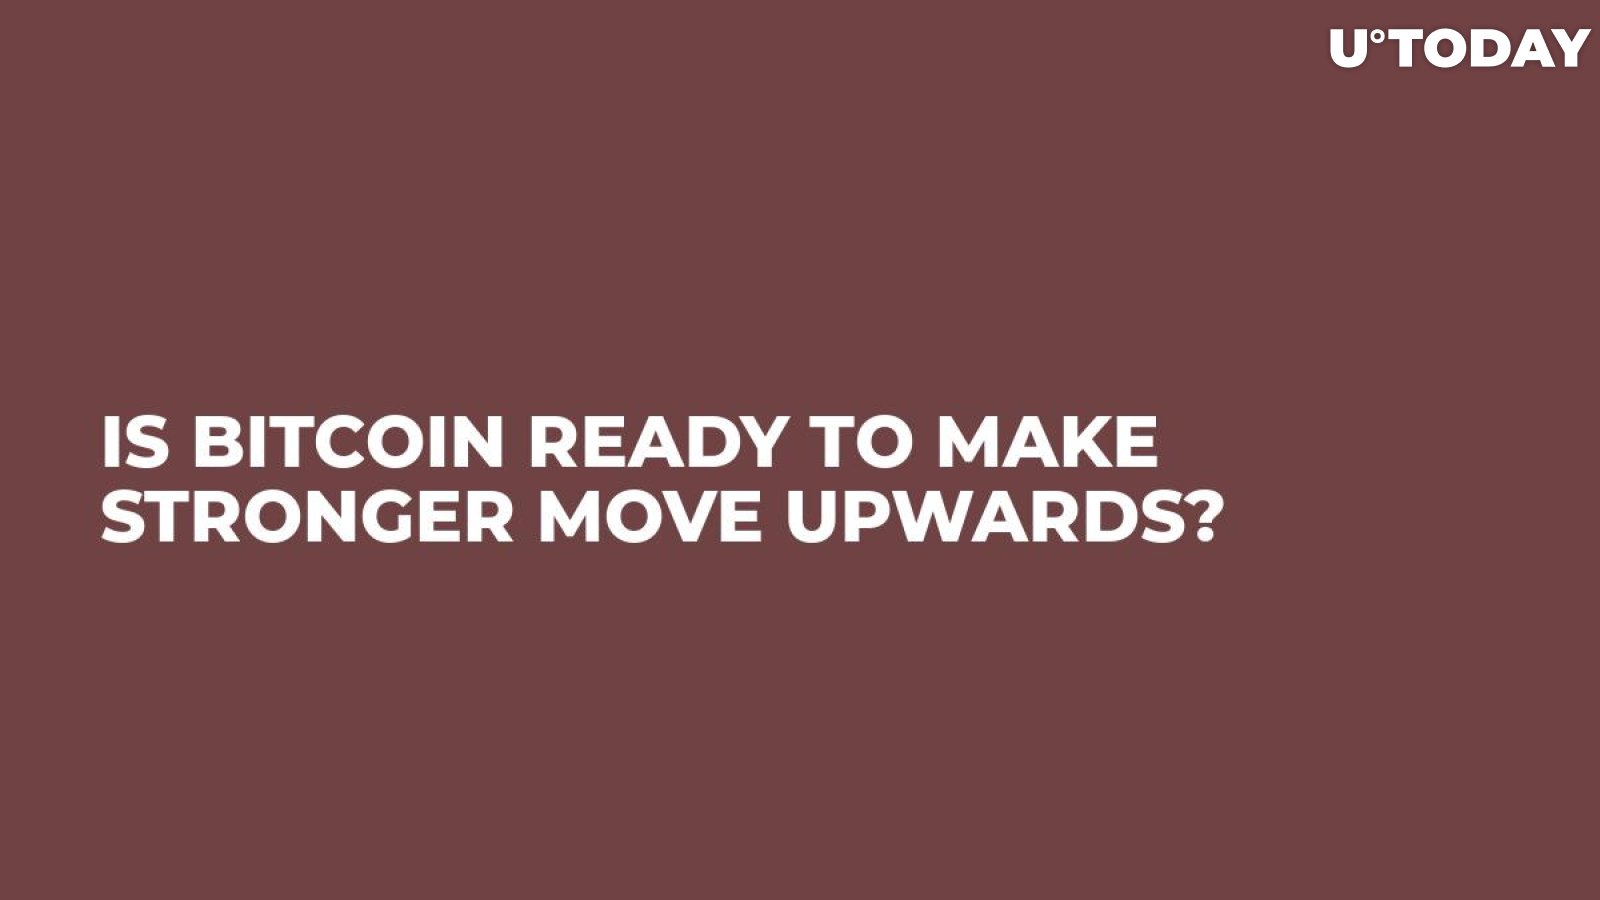 Is Bitcoin Ready to Make Stronger Move Upwards?